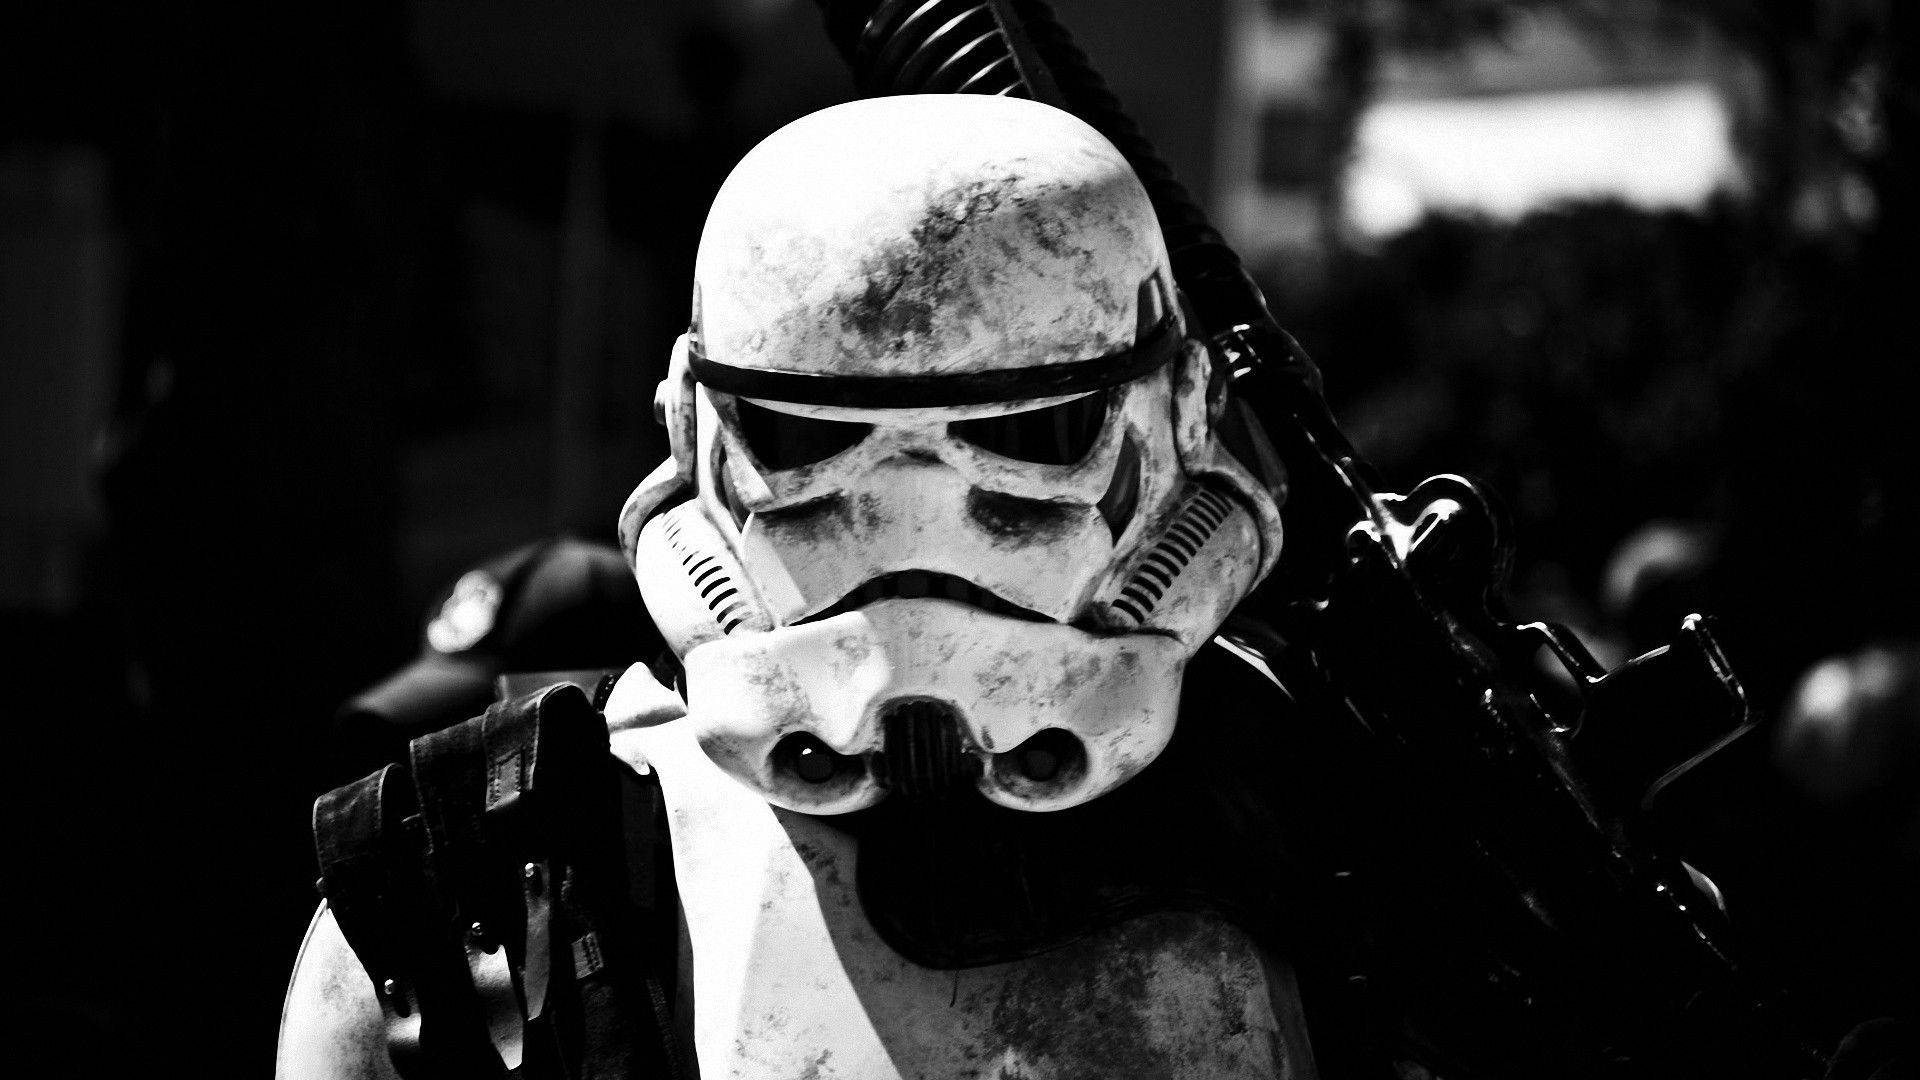 Hd Stormtrooper Close-up Background